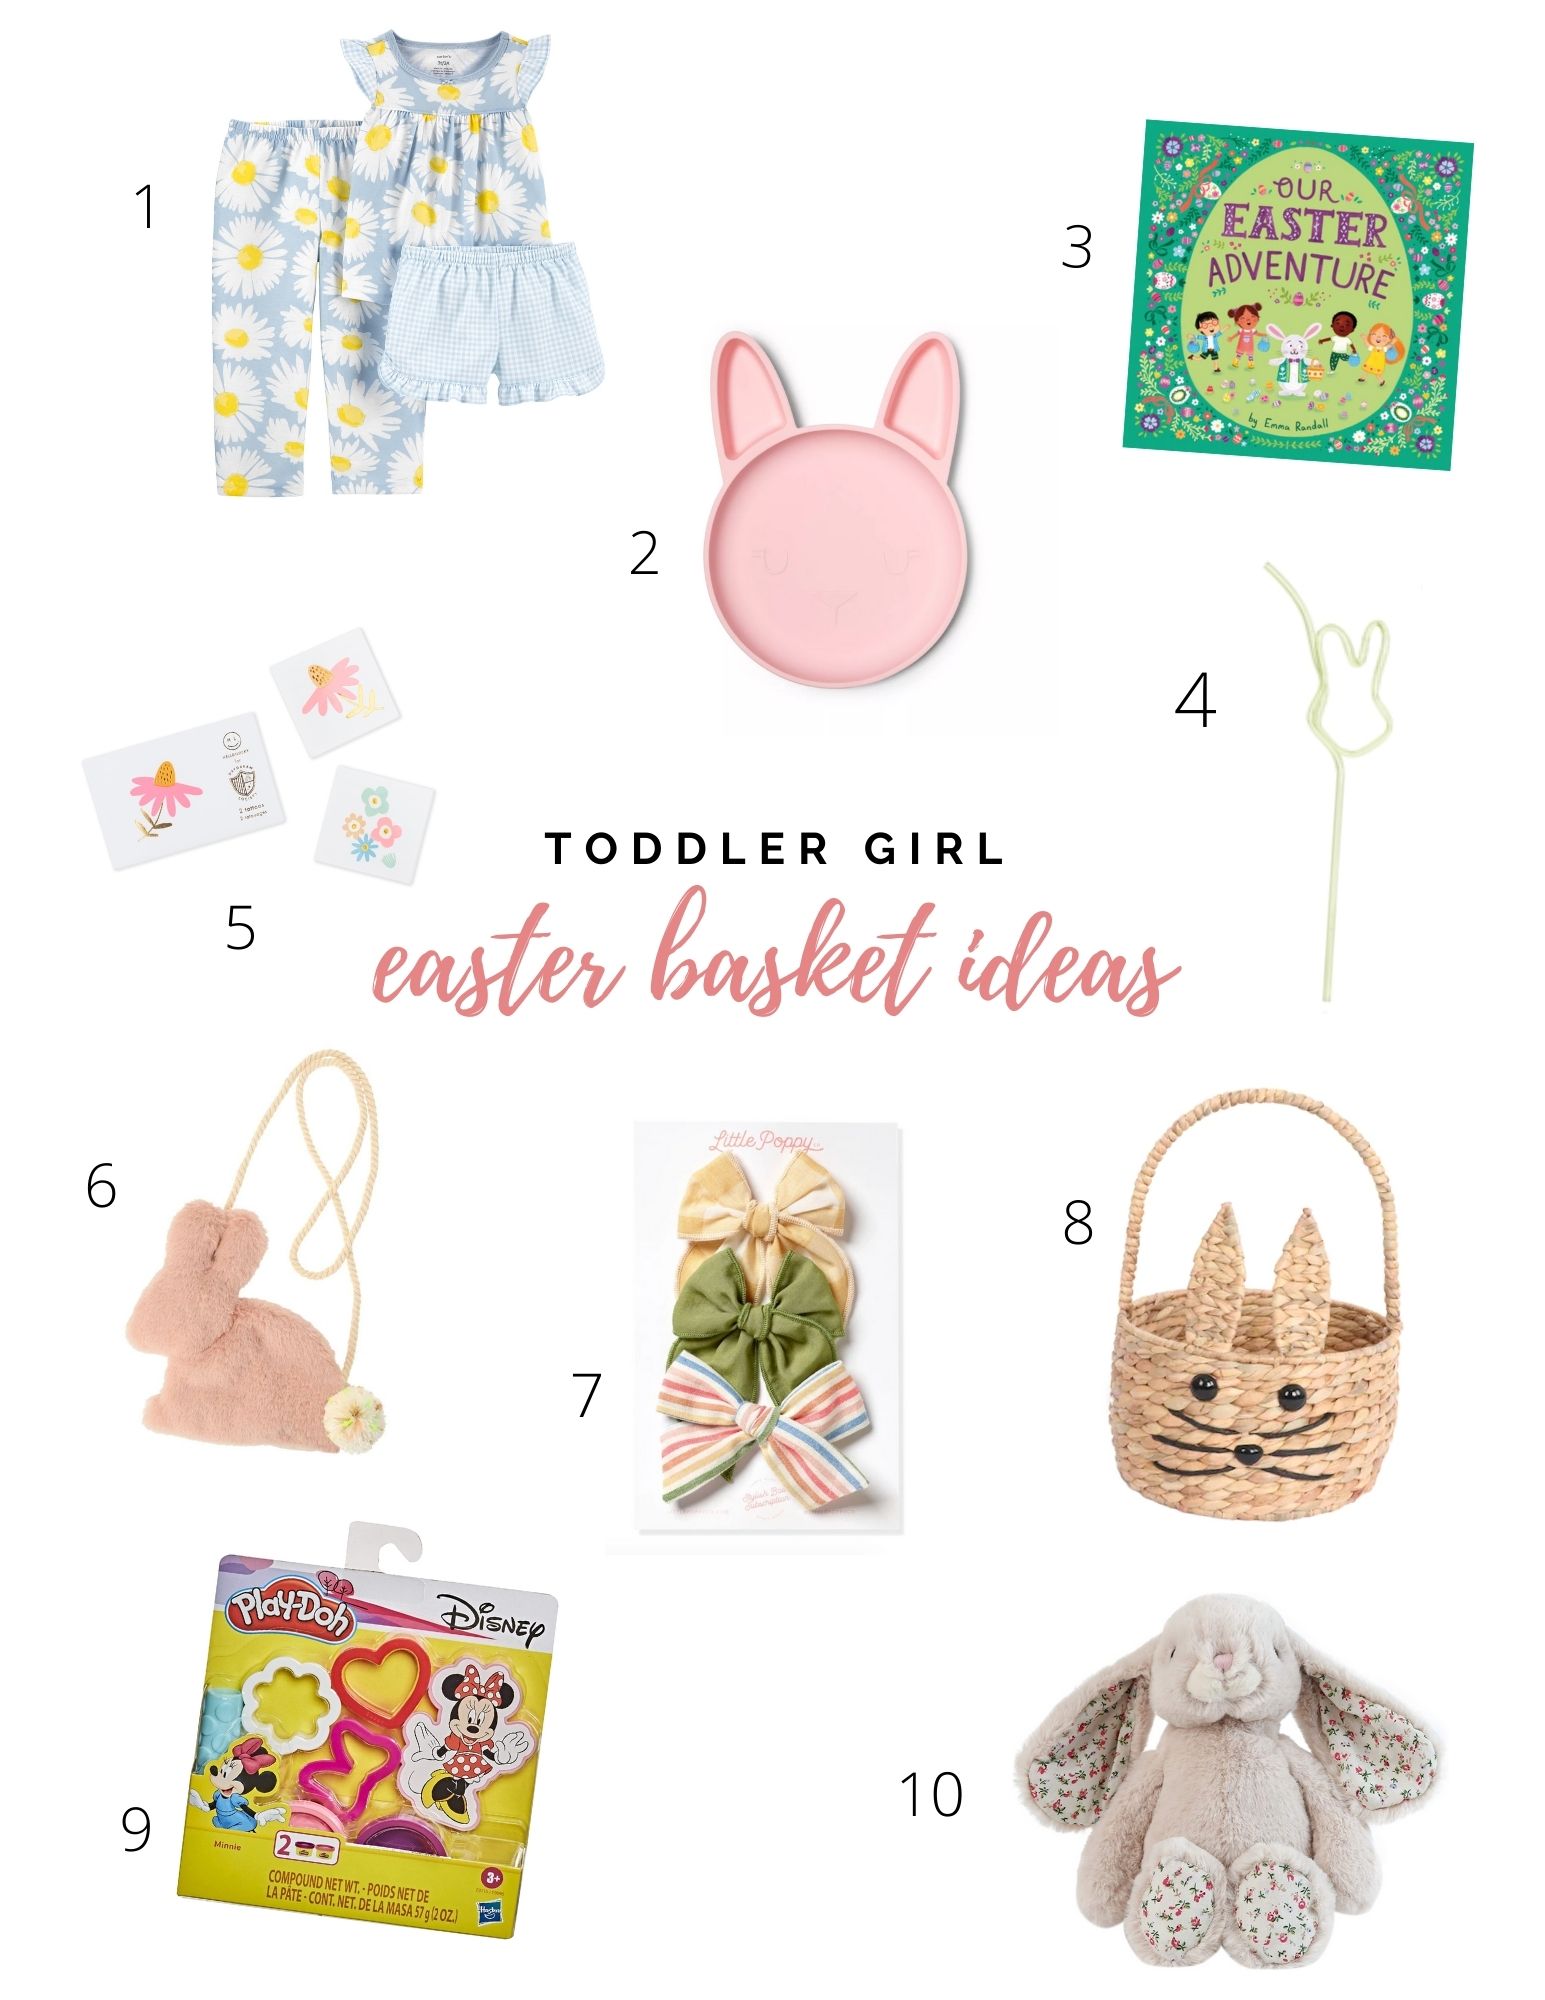 assorted items to consider for toddler girl easter basket